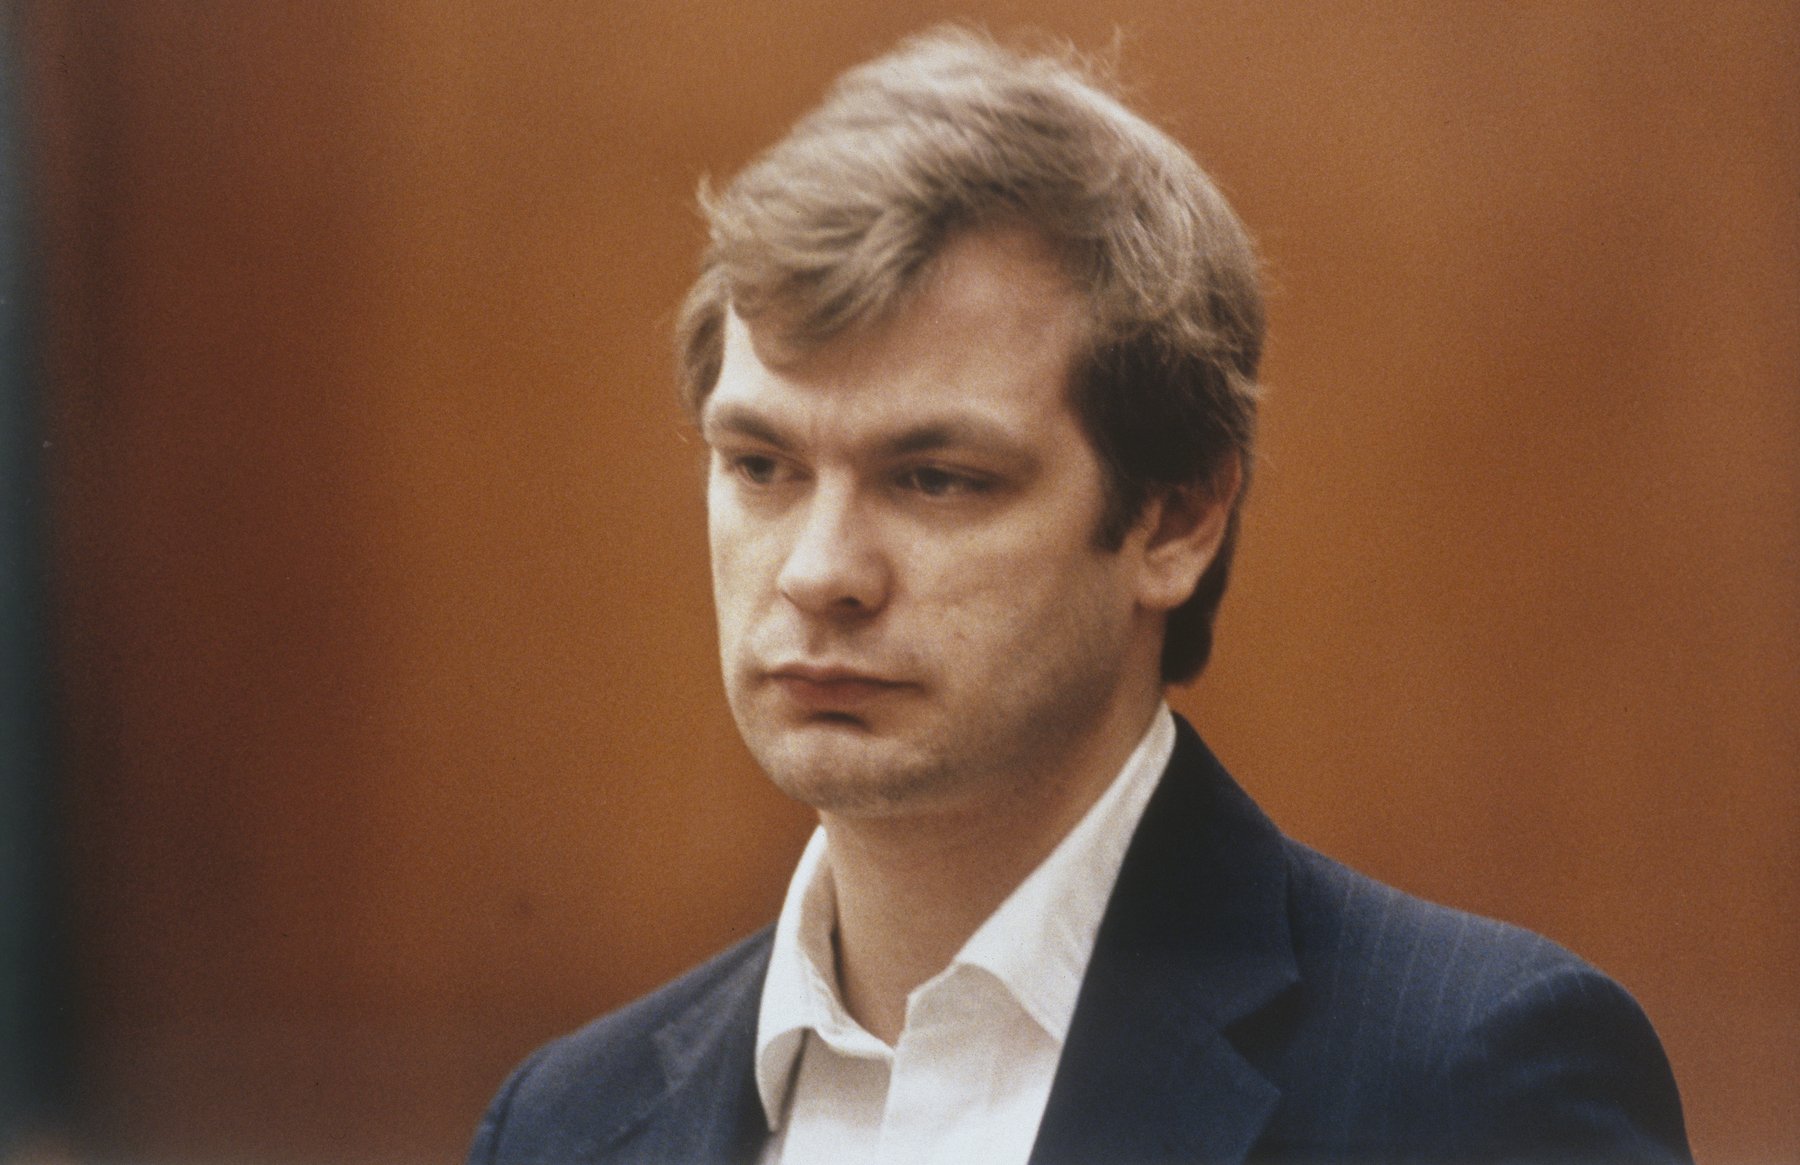 Jeffrey Dahmer, whose glasses are for sale, on a brown background.